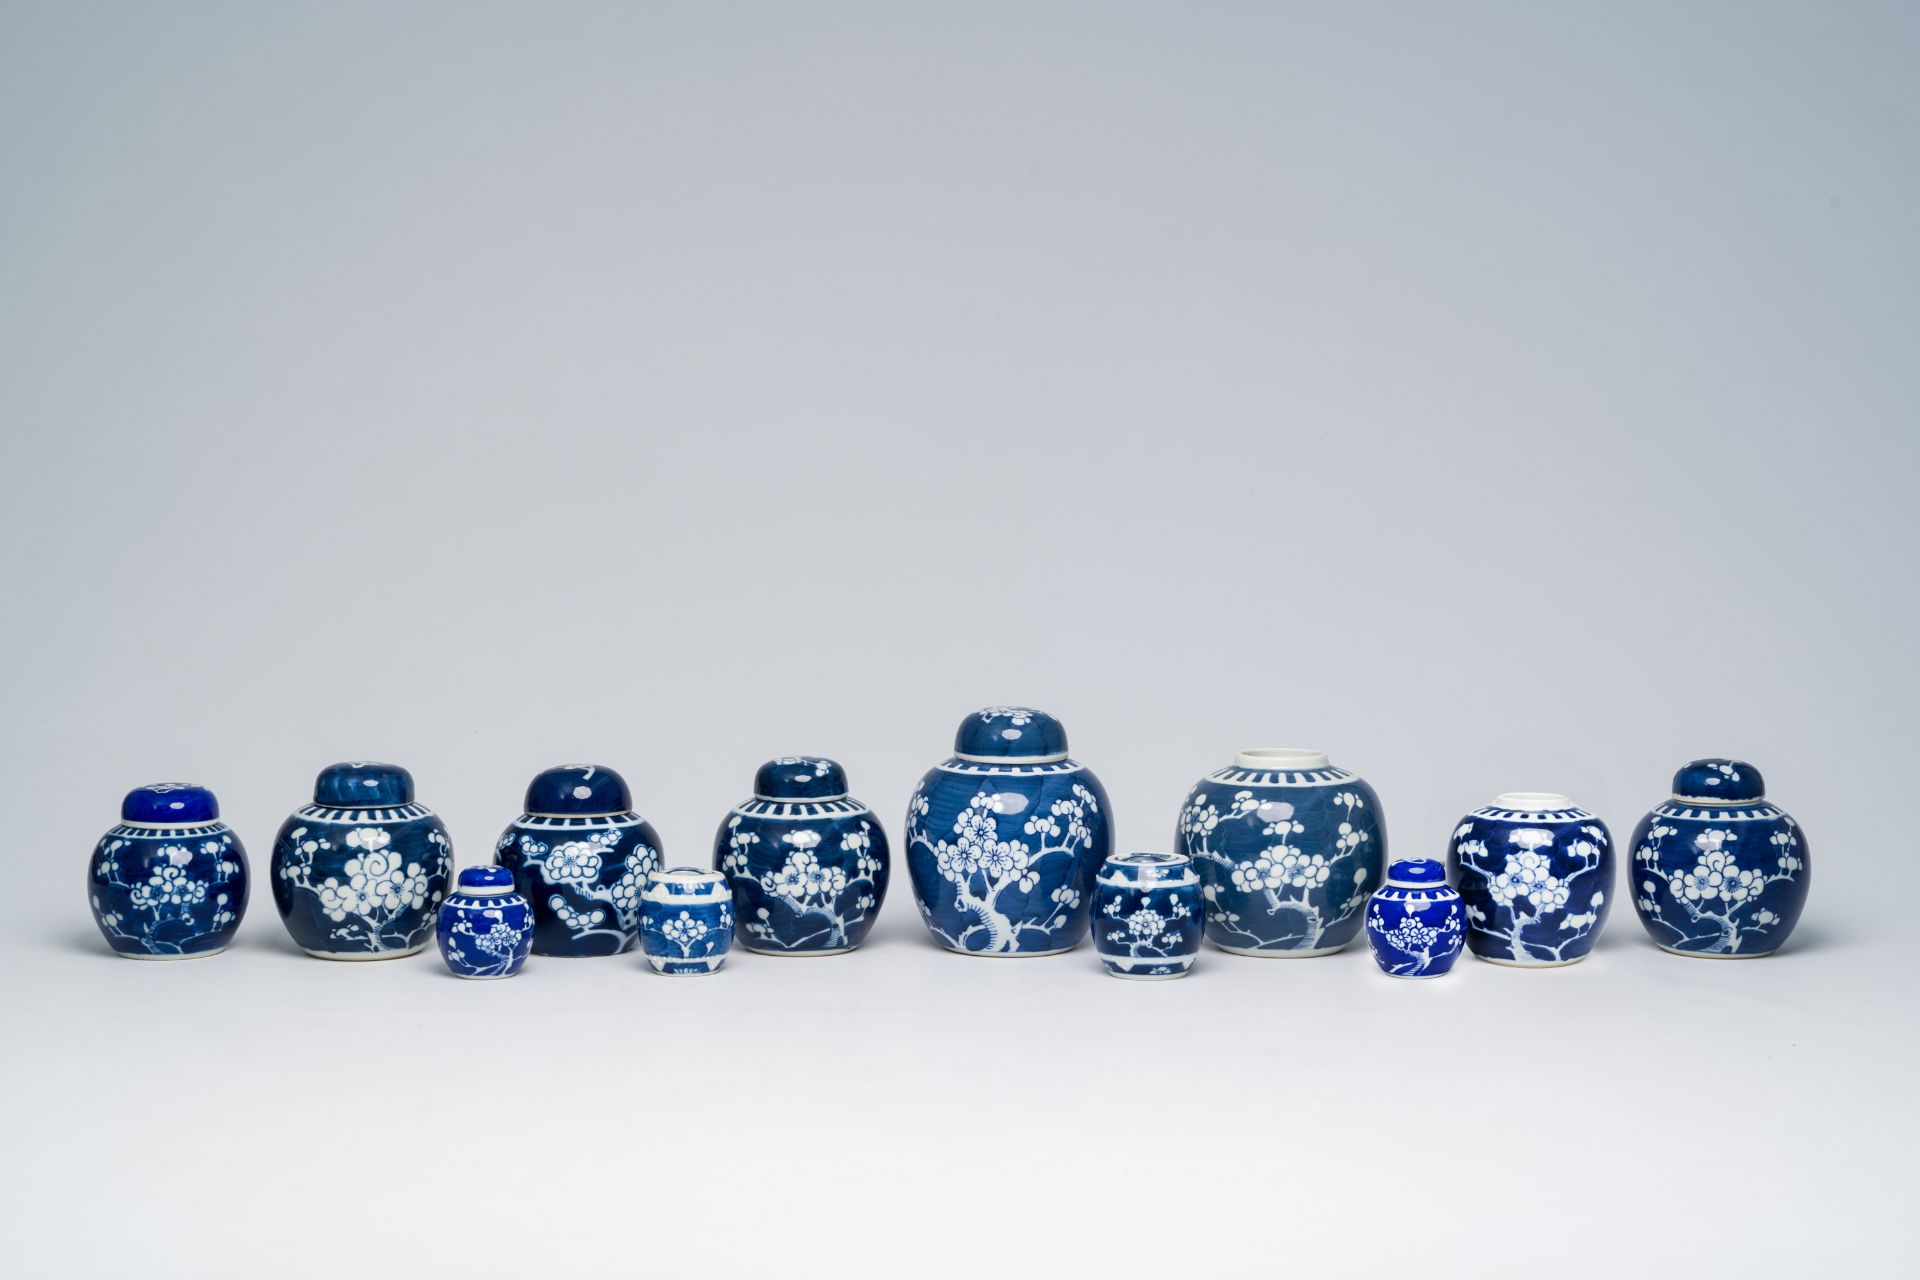 A varied collection of Chinese blue and white prunus on cracked ice ground porcelain, 19th/20th C. - Image 10 of 15